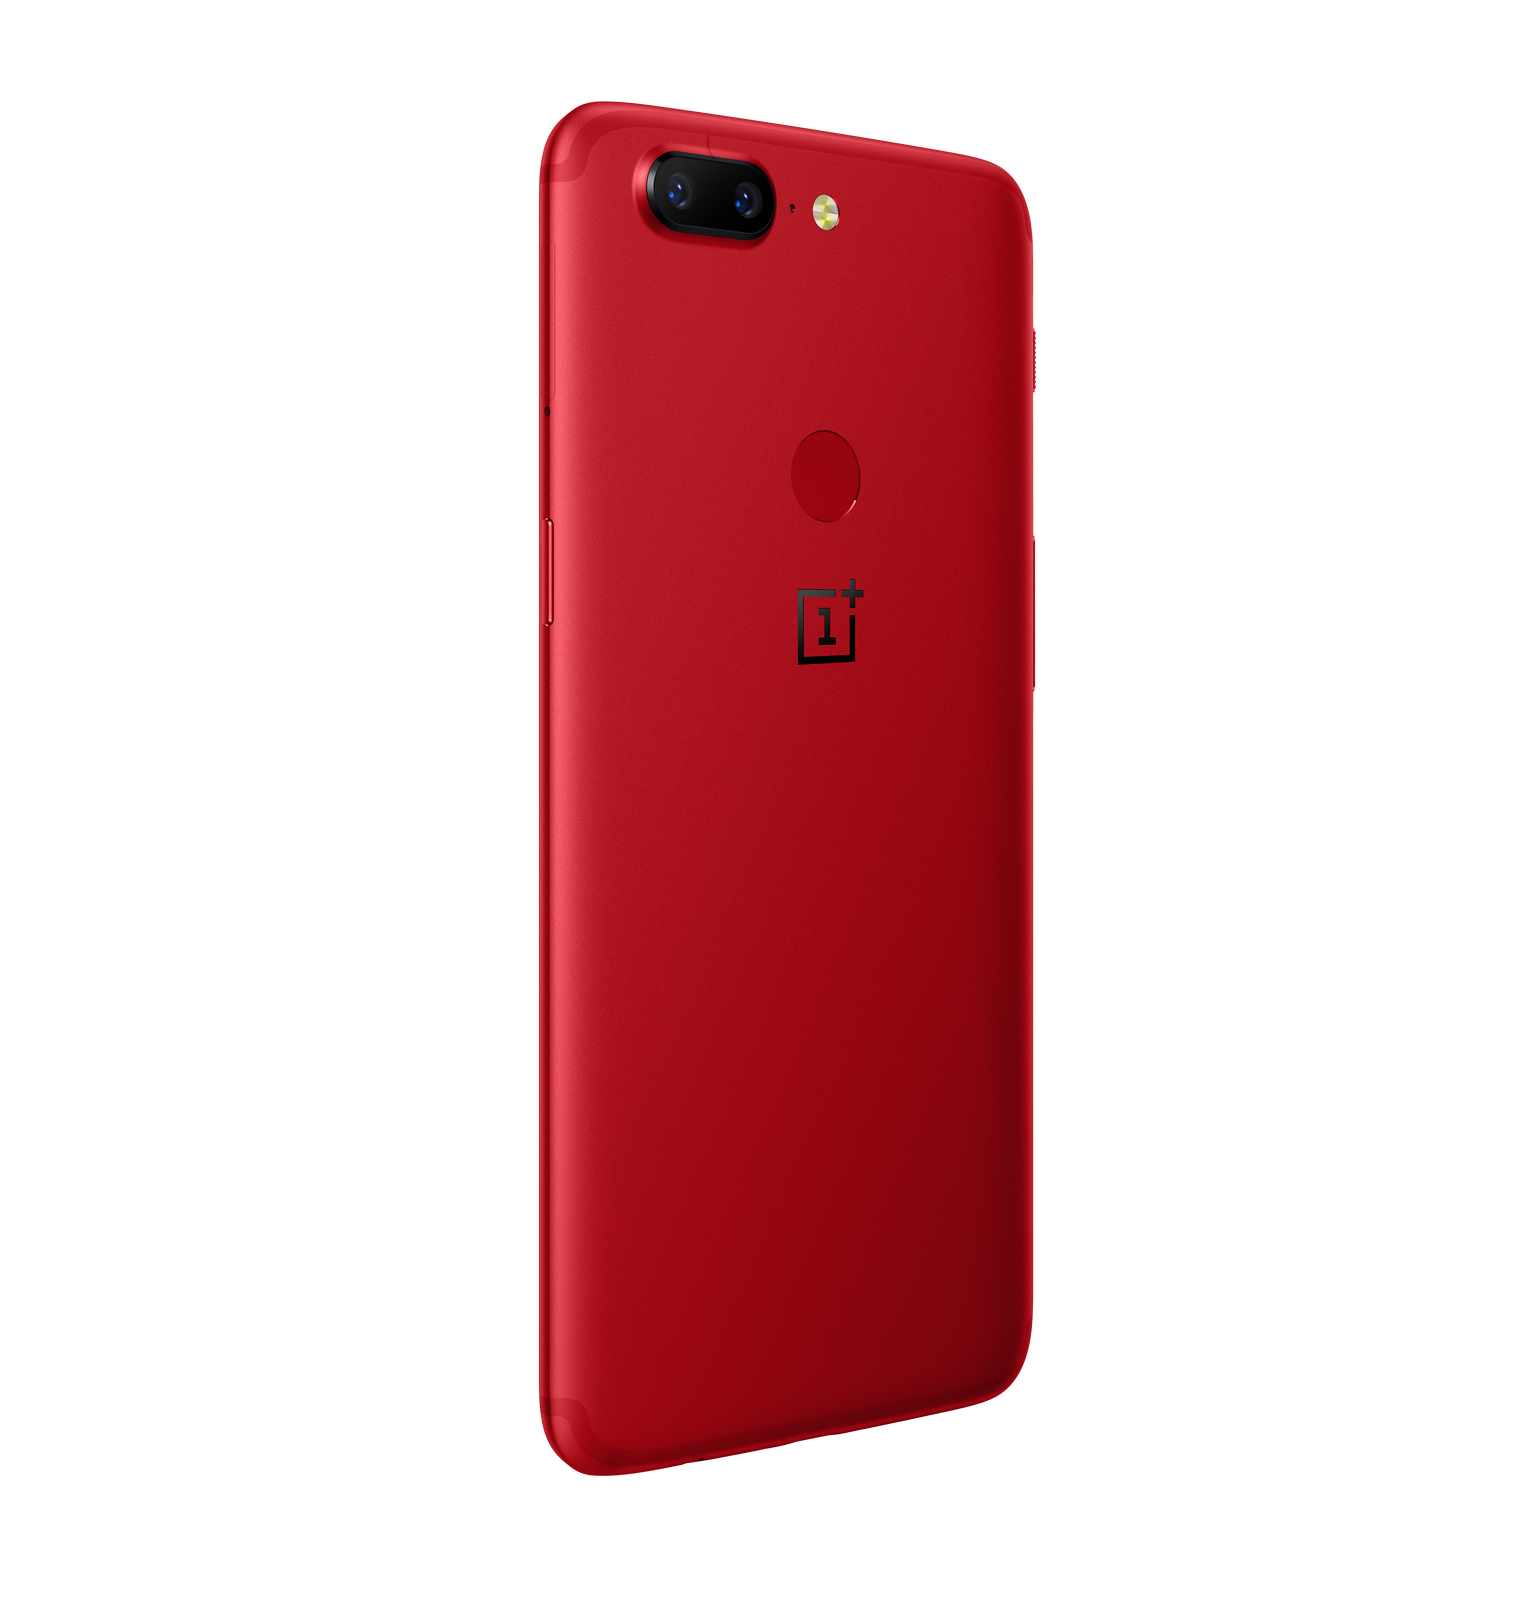 Oneplus 5T lava red